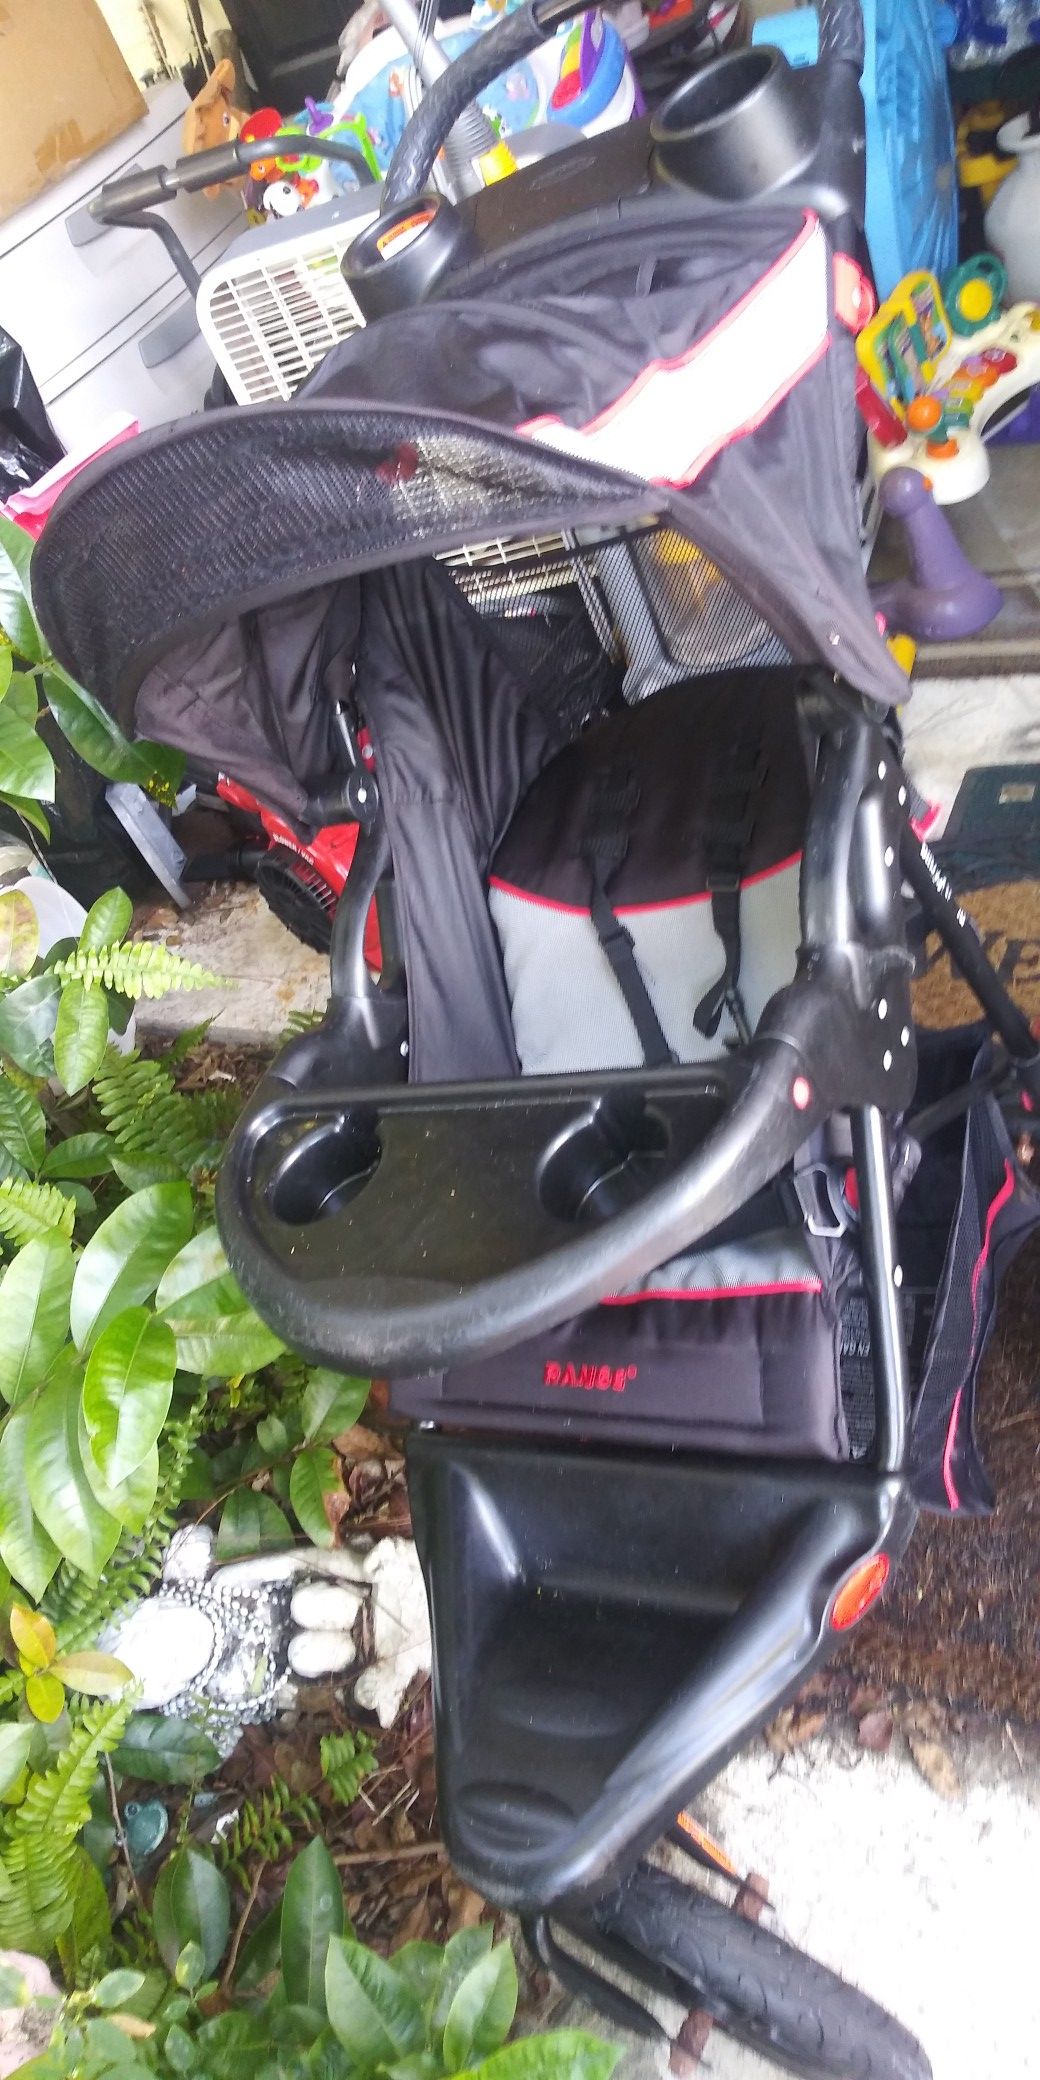 Baby trend jogger stroller like new 10dol firm lots deals my post go look